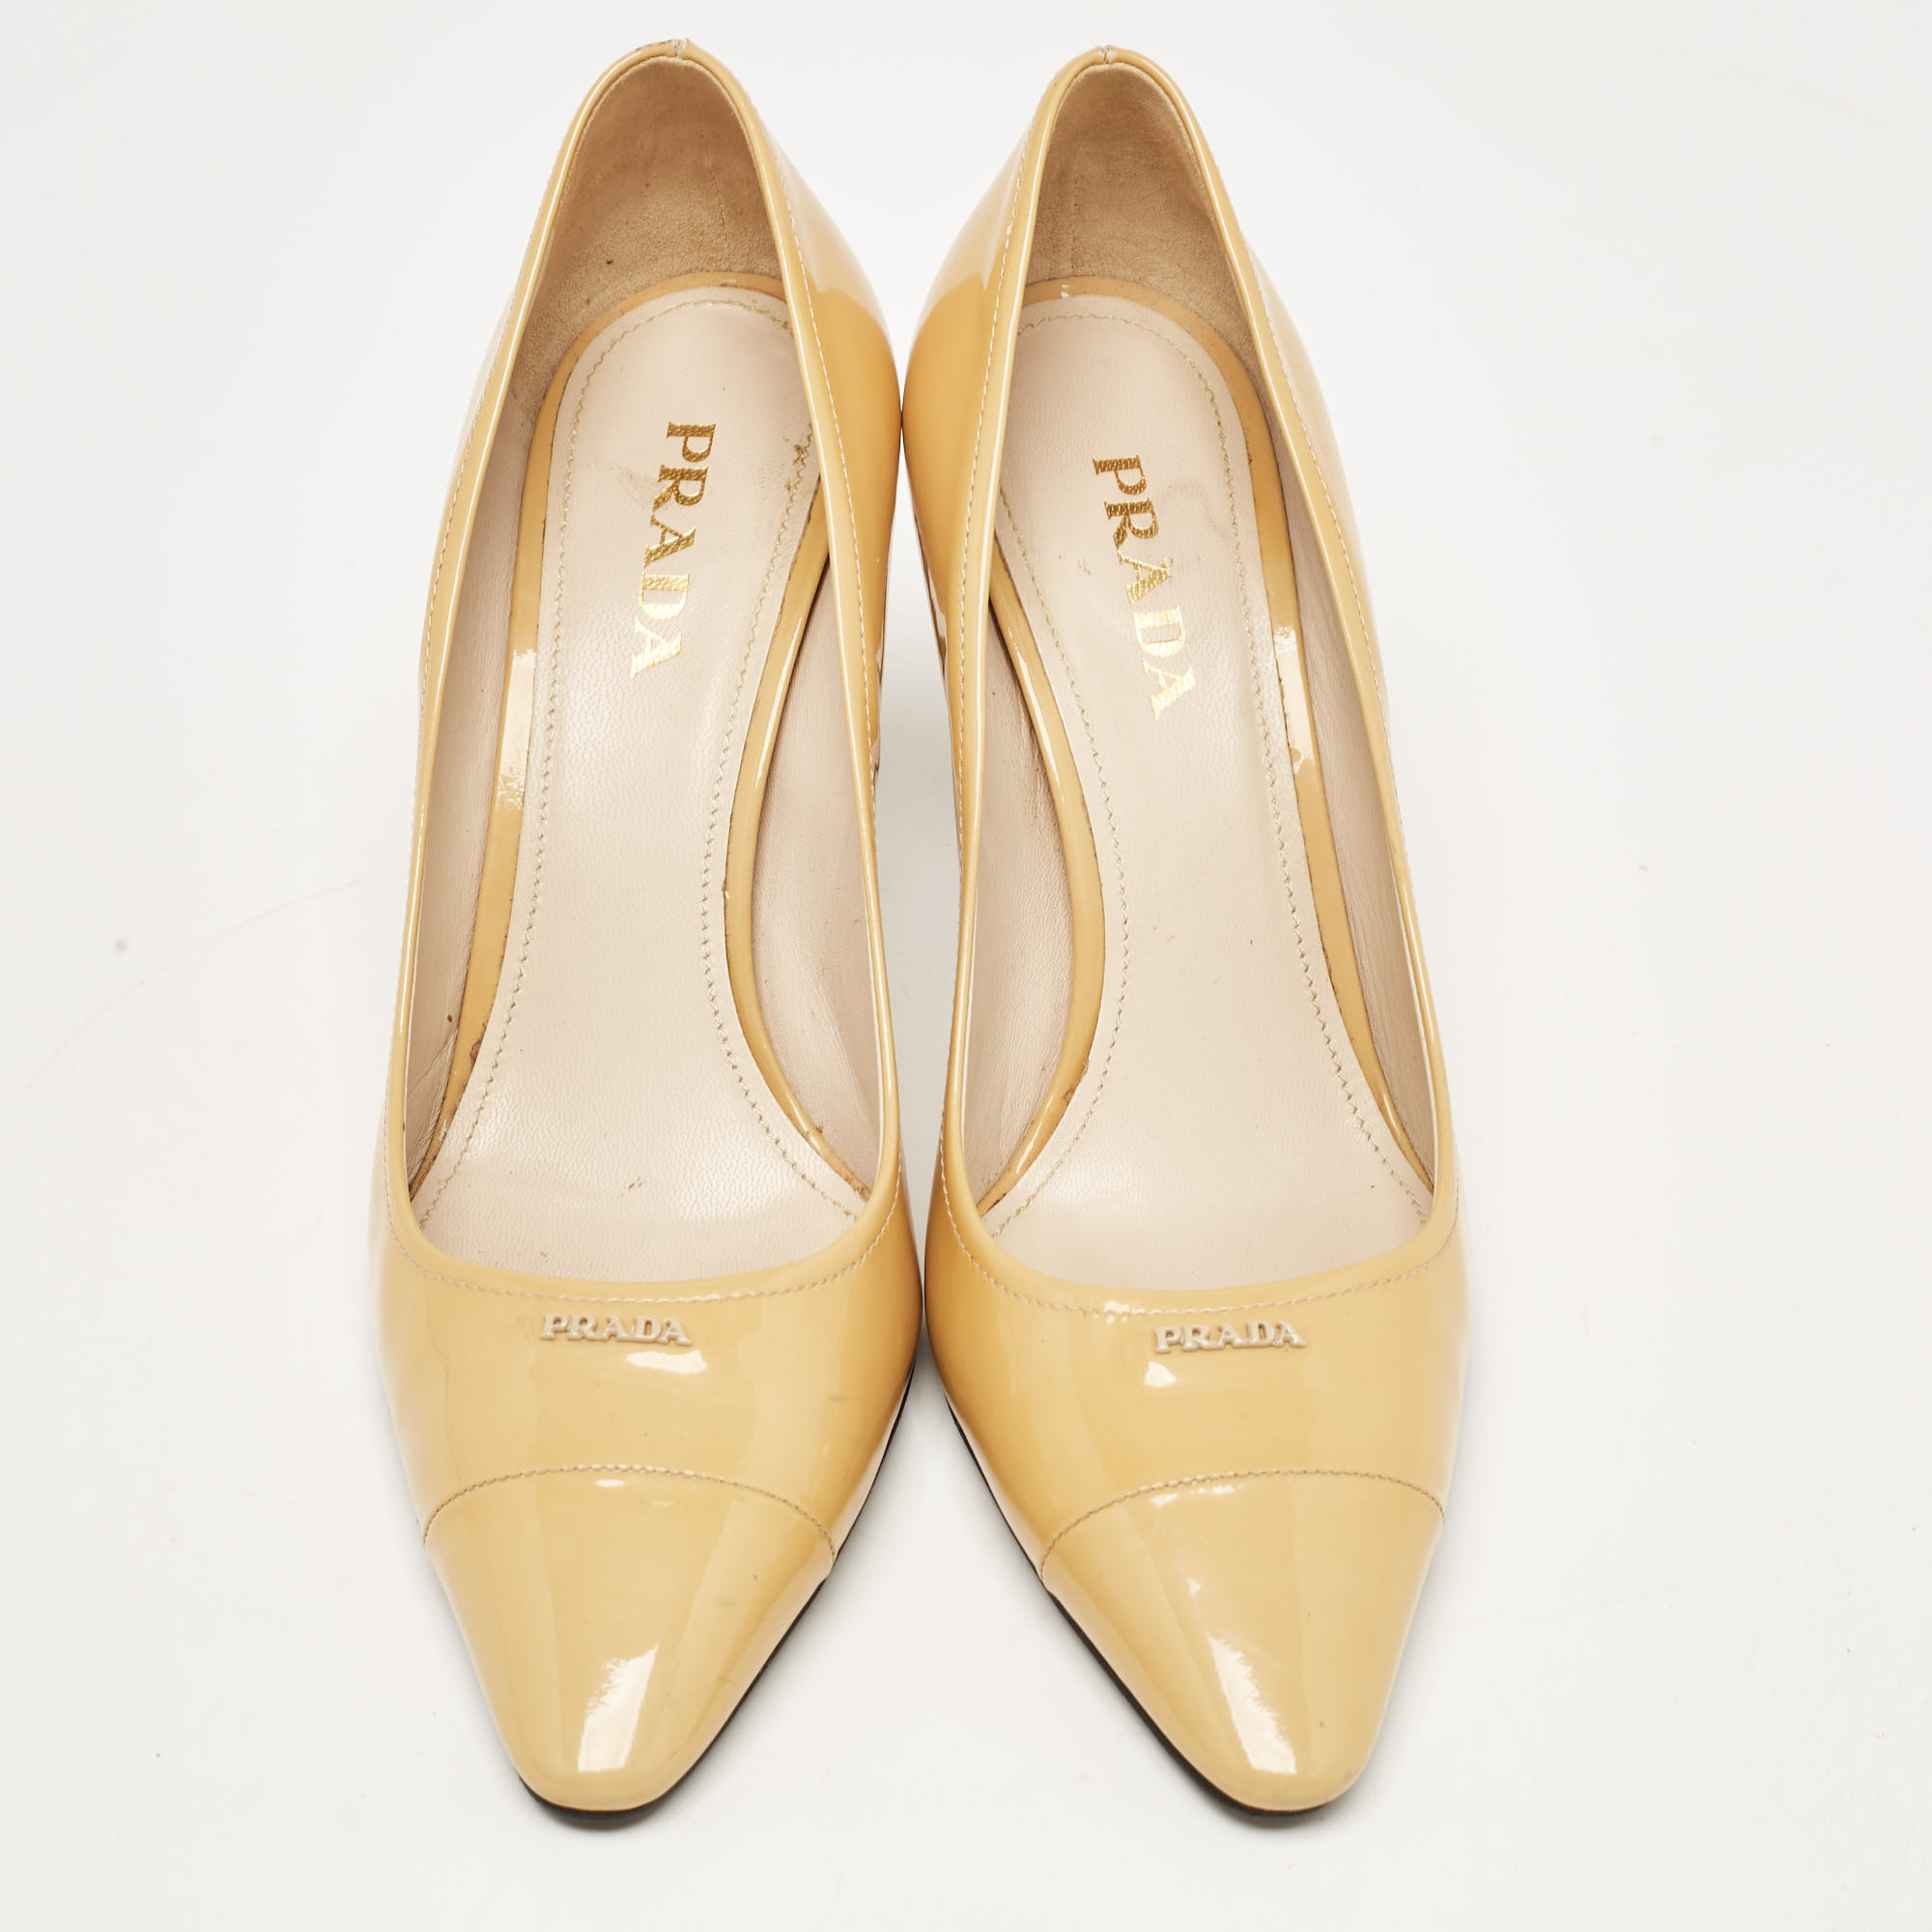 Prada Beige Patent Leather Pointed Toe Pumps Size 39.5